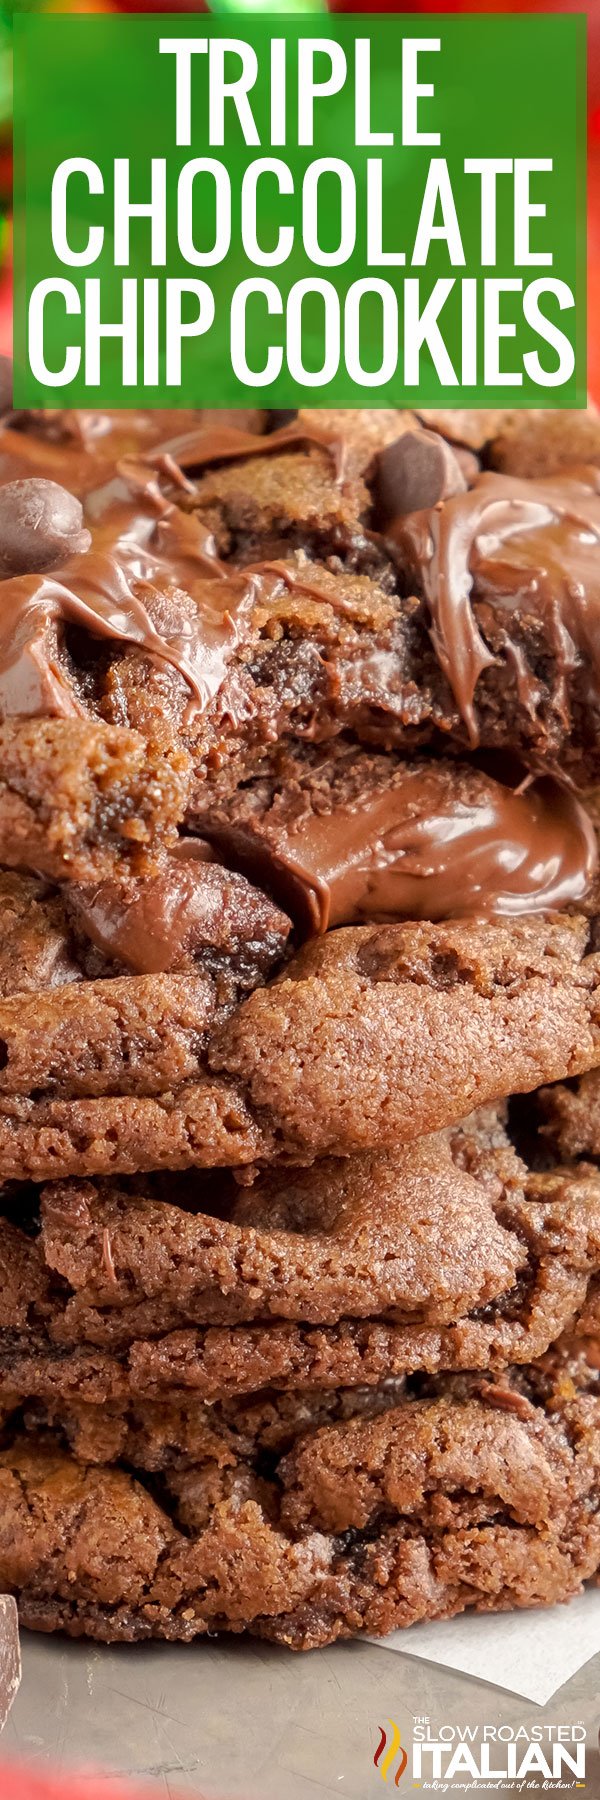 titled image (and shown): triple chocolate chip cookies